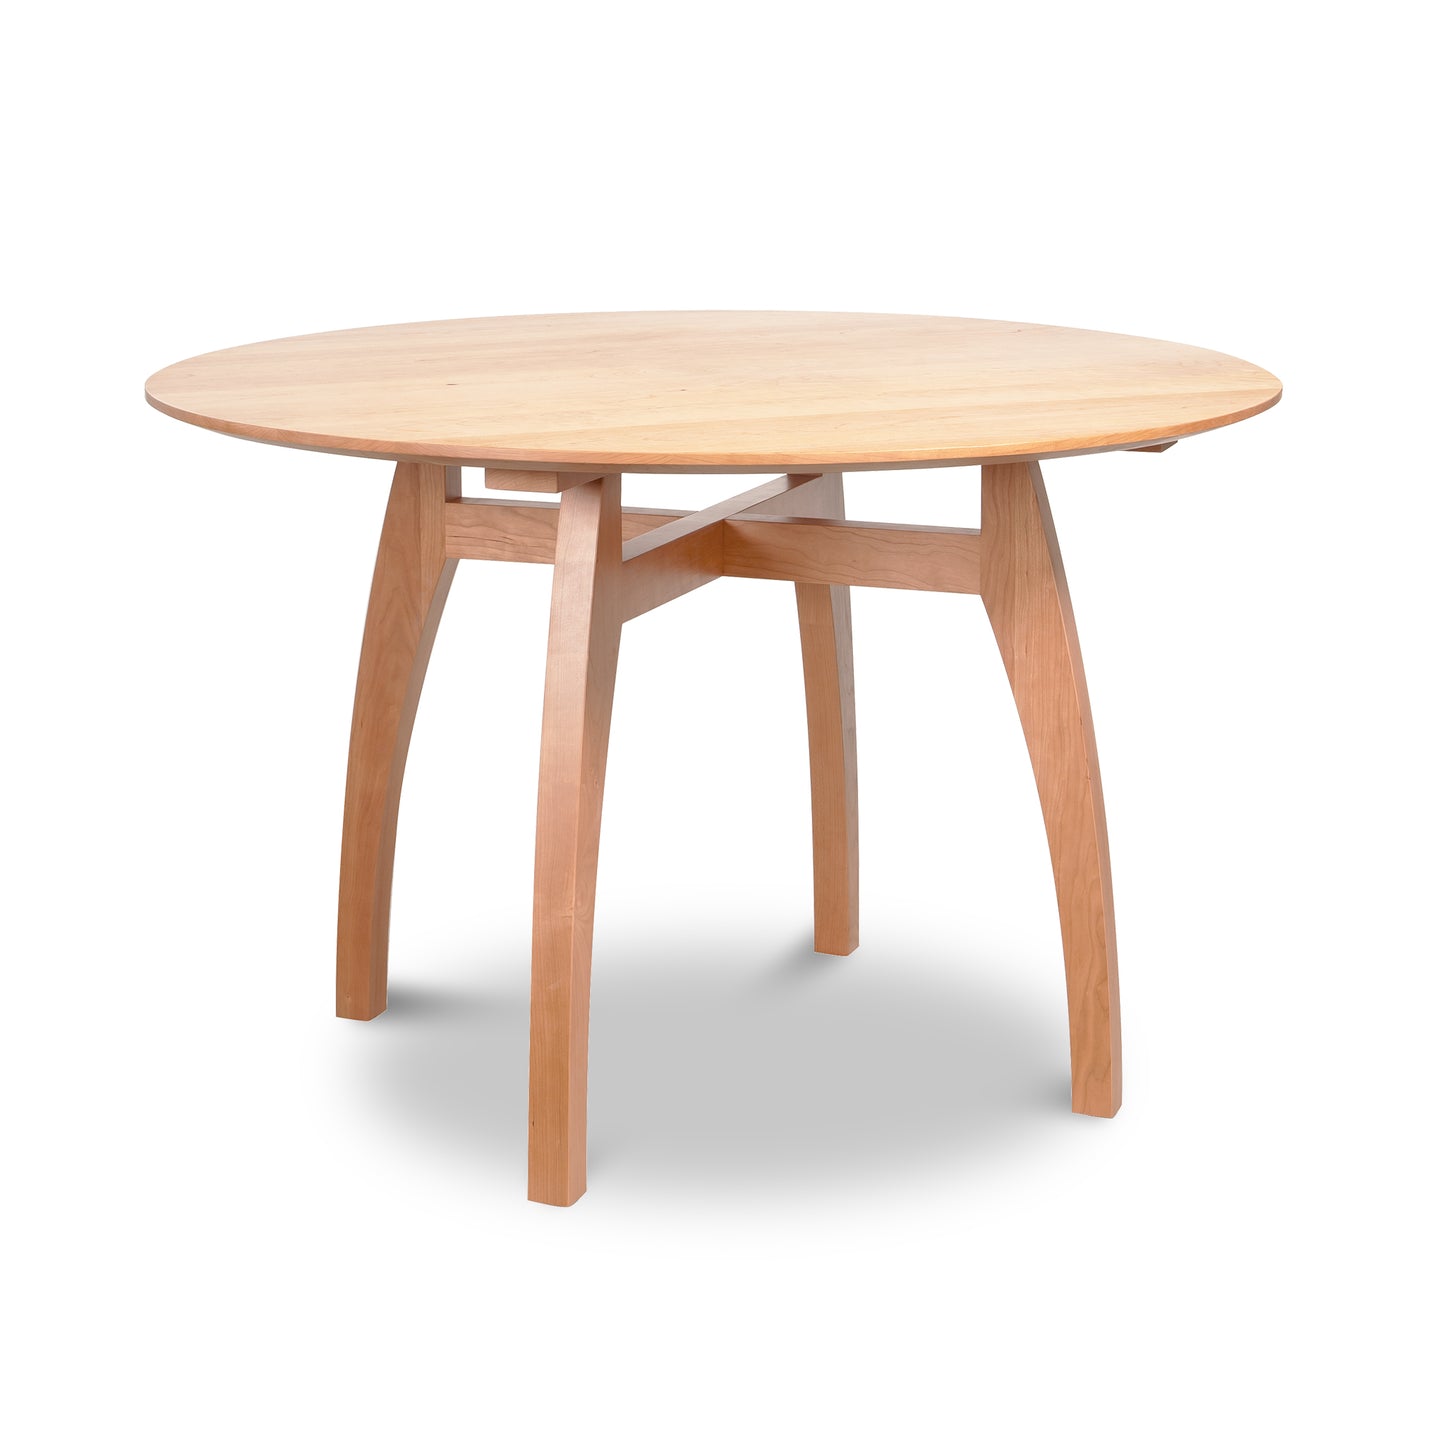 A handmade organic wood table, inspired by Lyndon Furniture's Vermont Modern Round Solid Top Pedestal Table, featuring a round shape and two legs on a white background.